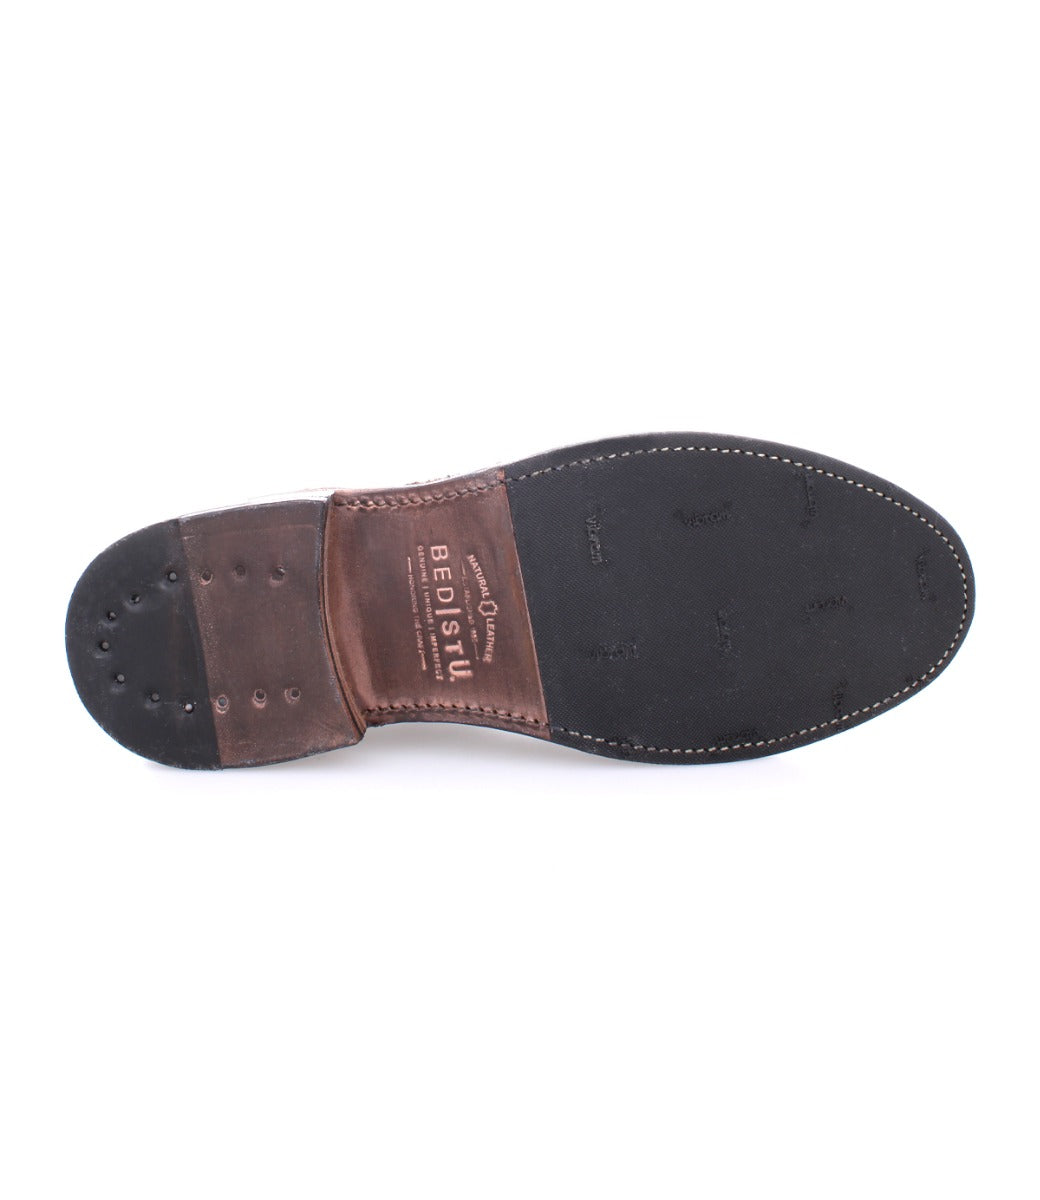 A men's Thorn shoe with brown and black soles from the Bed Stu brand.